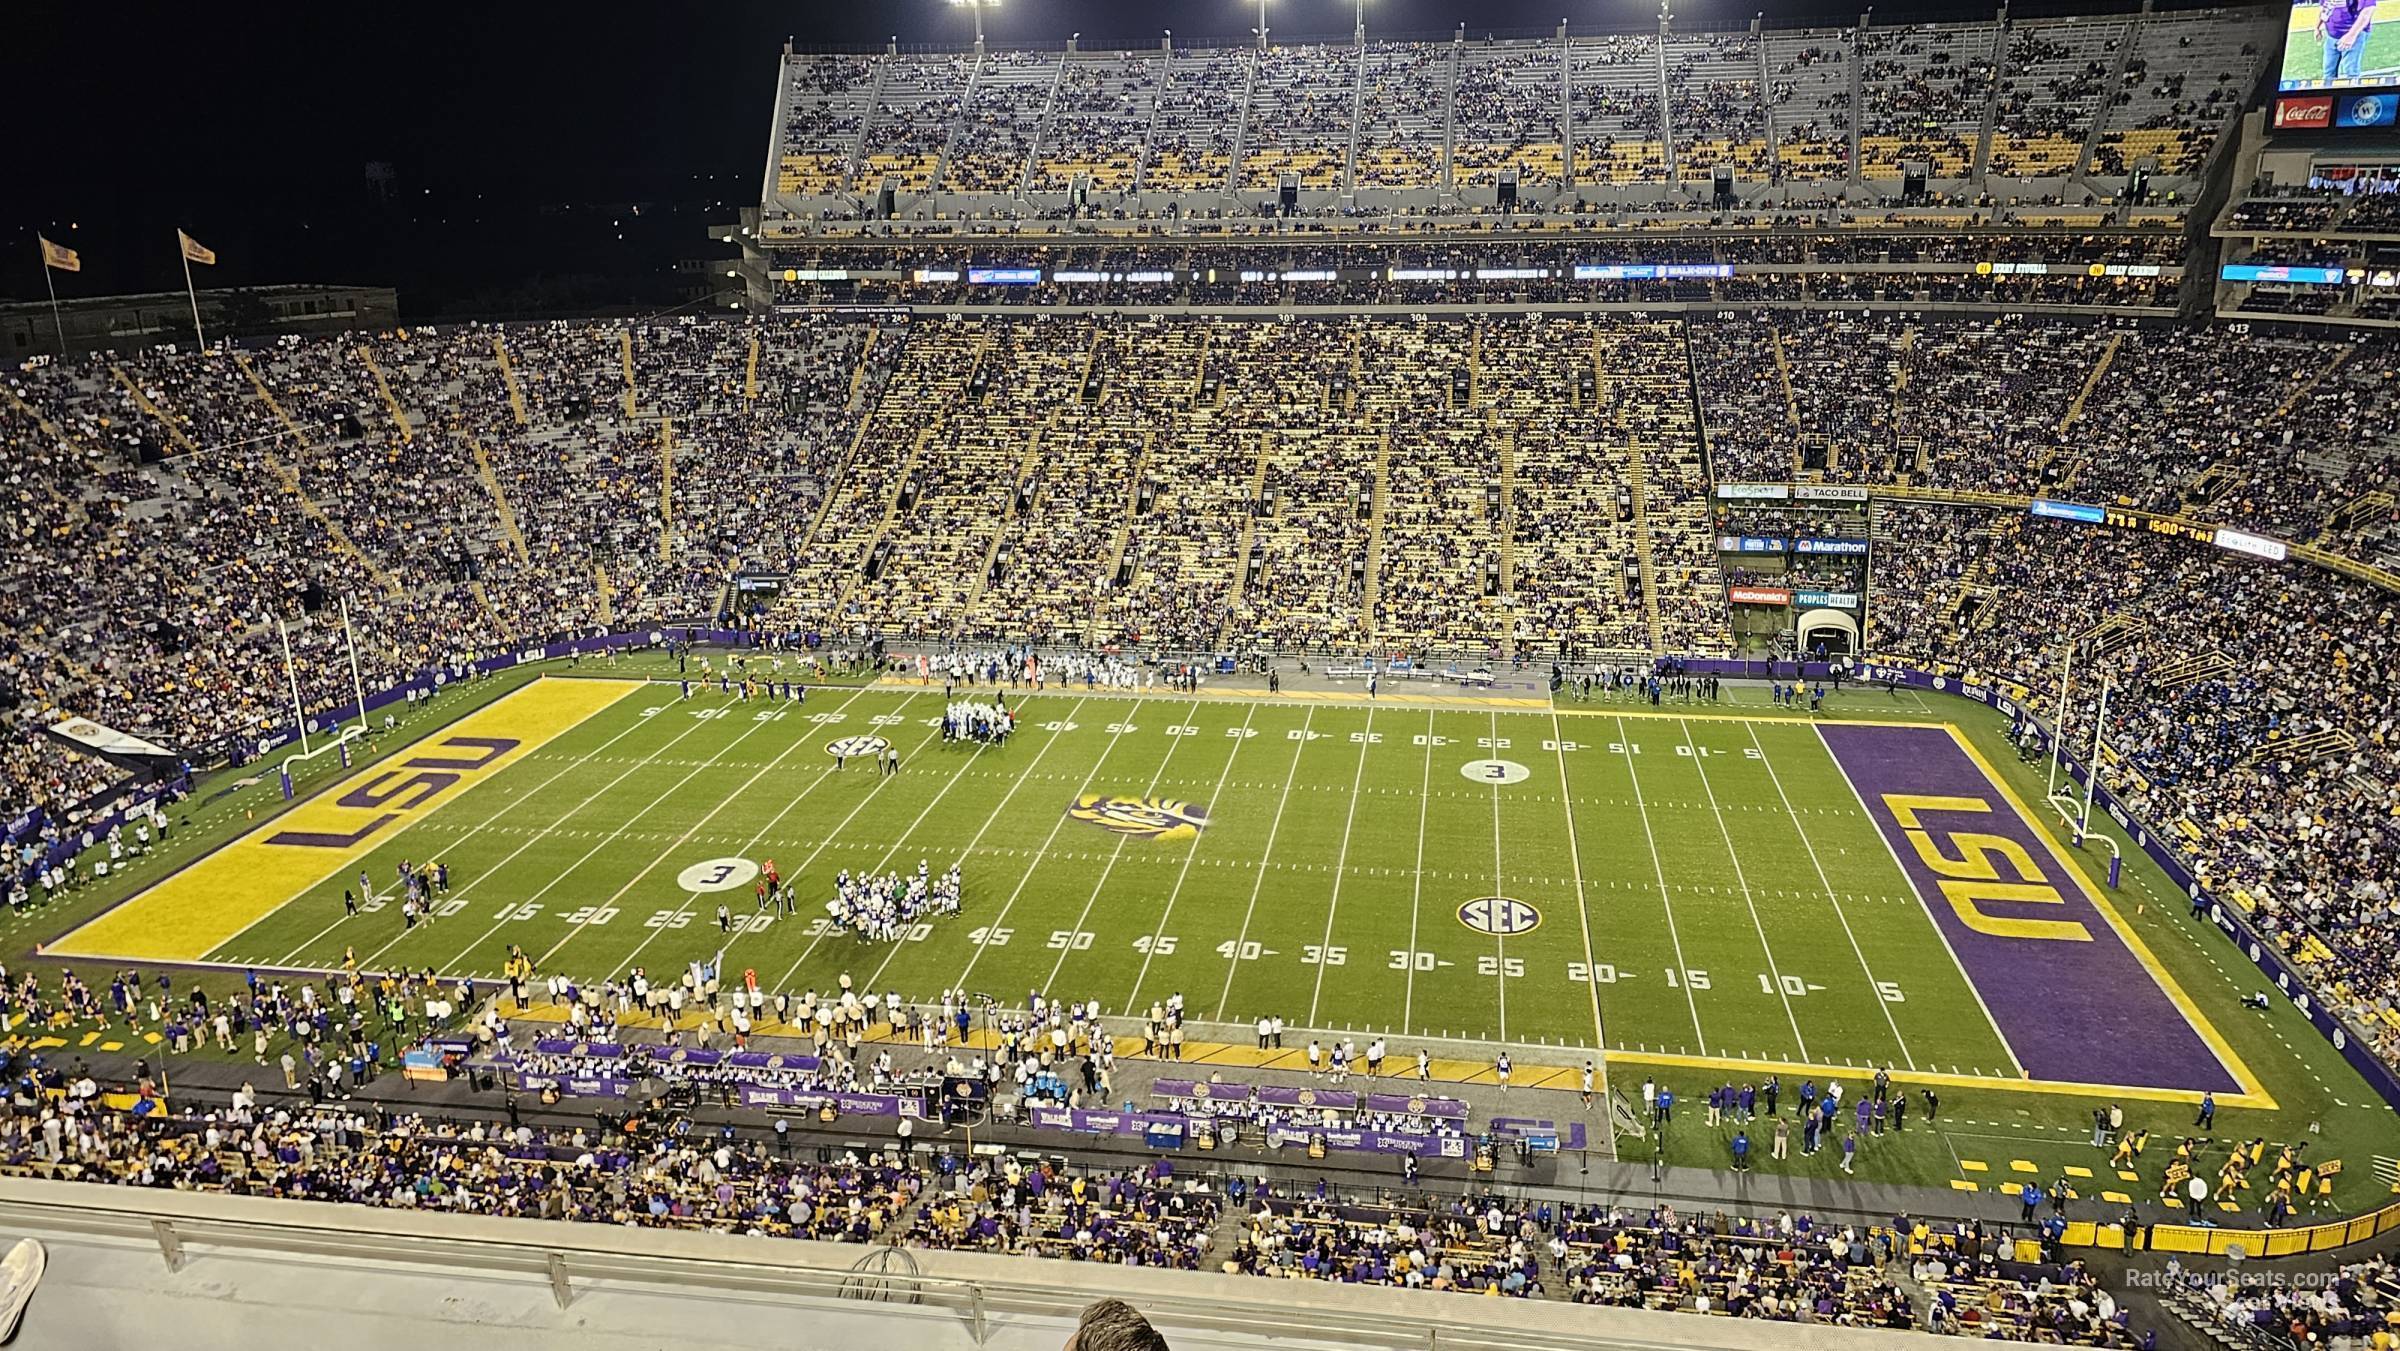 section 515, row 4 seat view  - tiger stadium